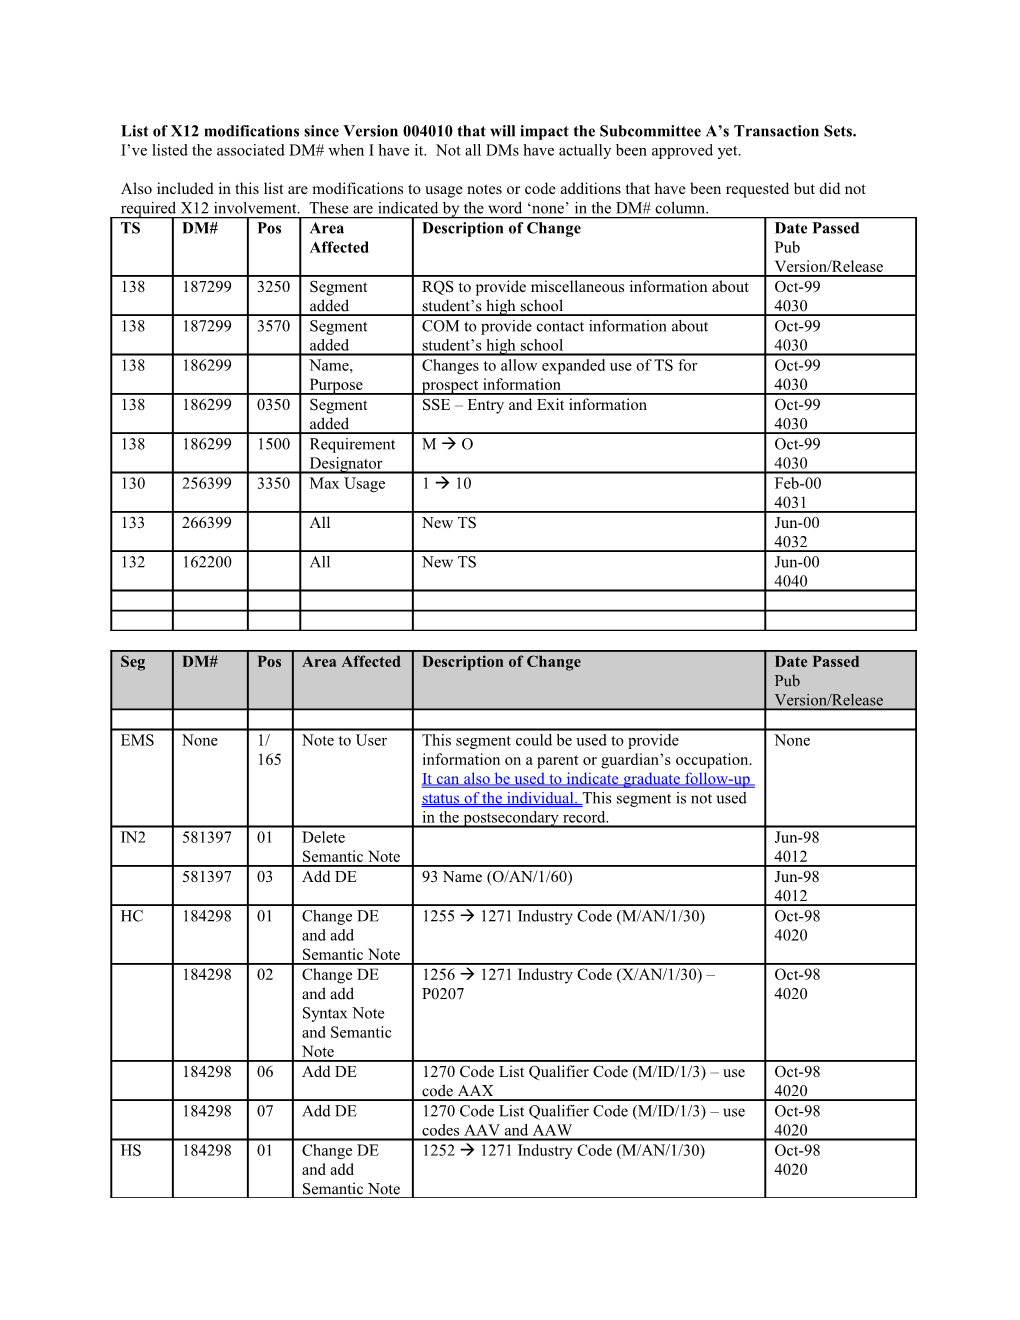 List of X12 Modifications Since Version 004010 That Will Impact the Subcommittee a S Transaction